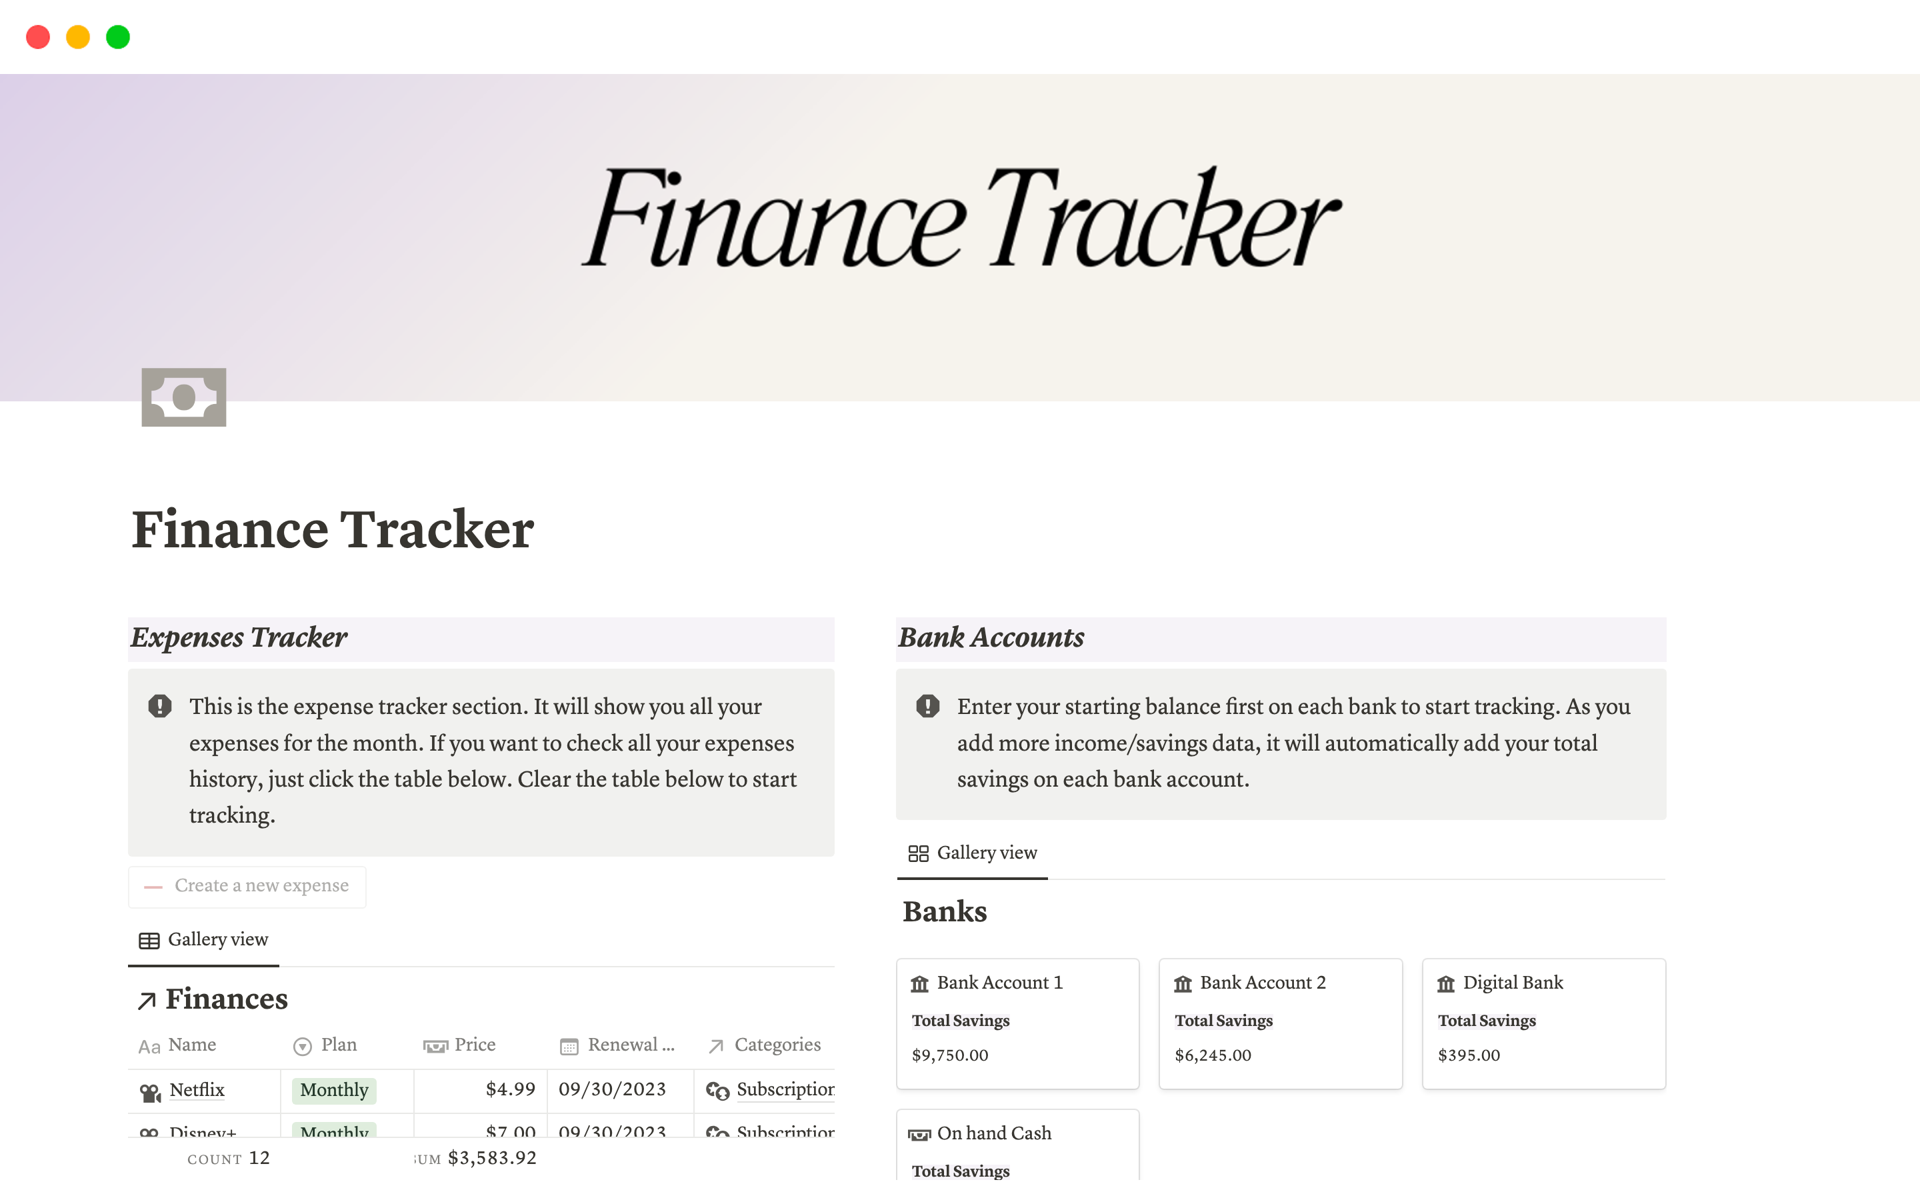  It's easy to lose sight of where your money is going, forget about important bills, or neglect your savings goals. The Finance Tracker Notion Template is here to simplify your financial journey and bring you peace of mind.